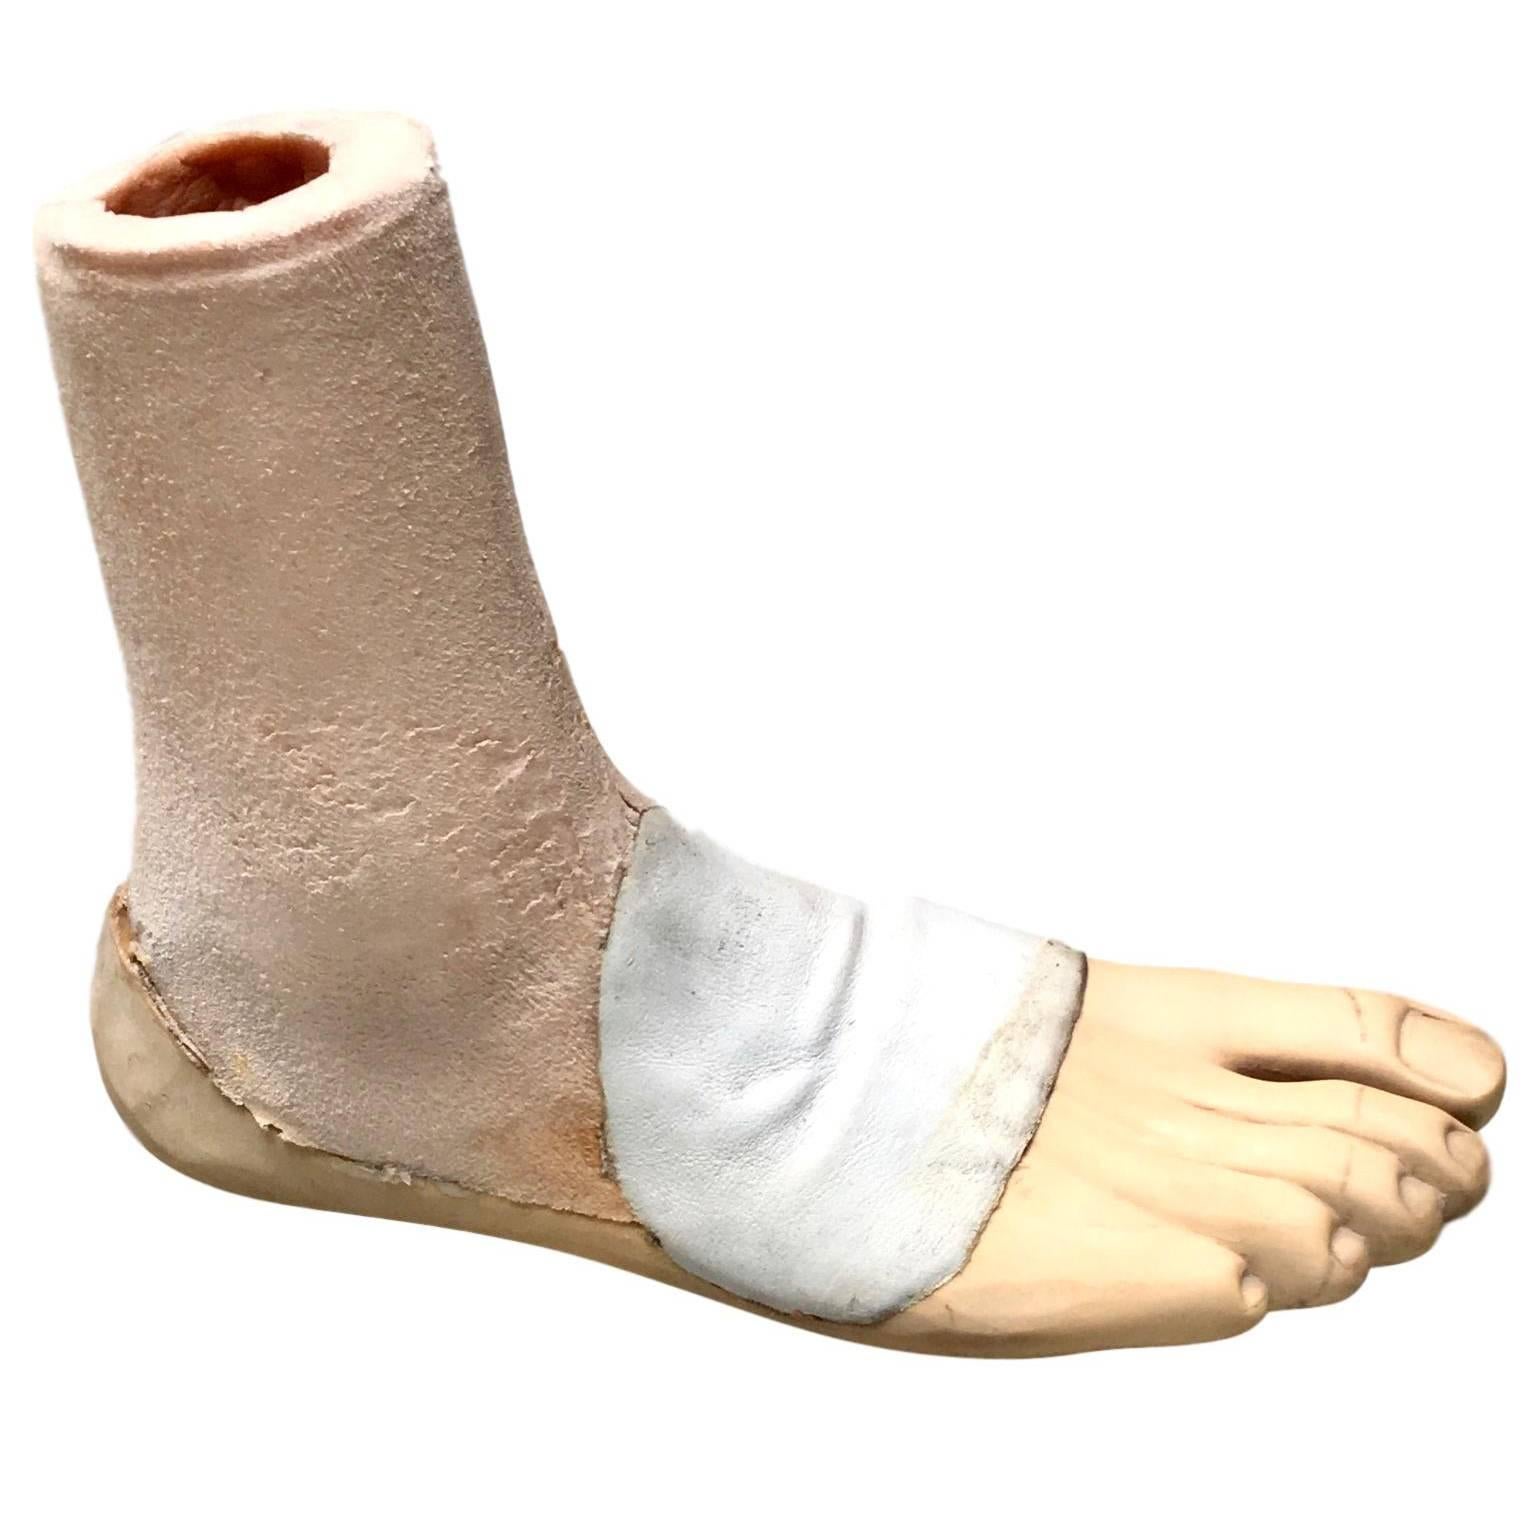 Vintage Prosthetic Foot For Sale